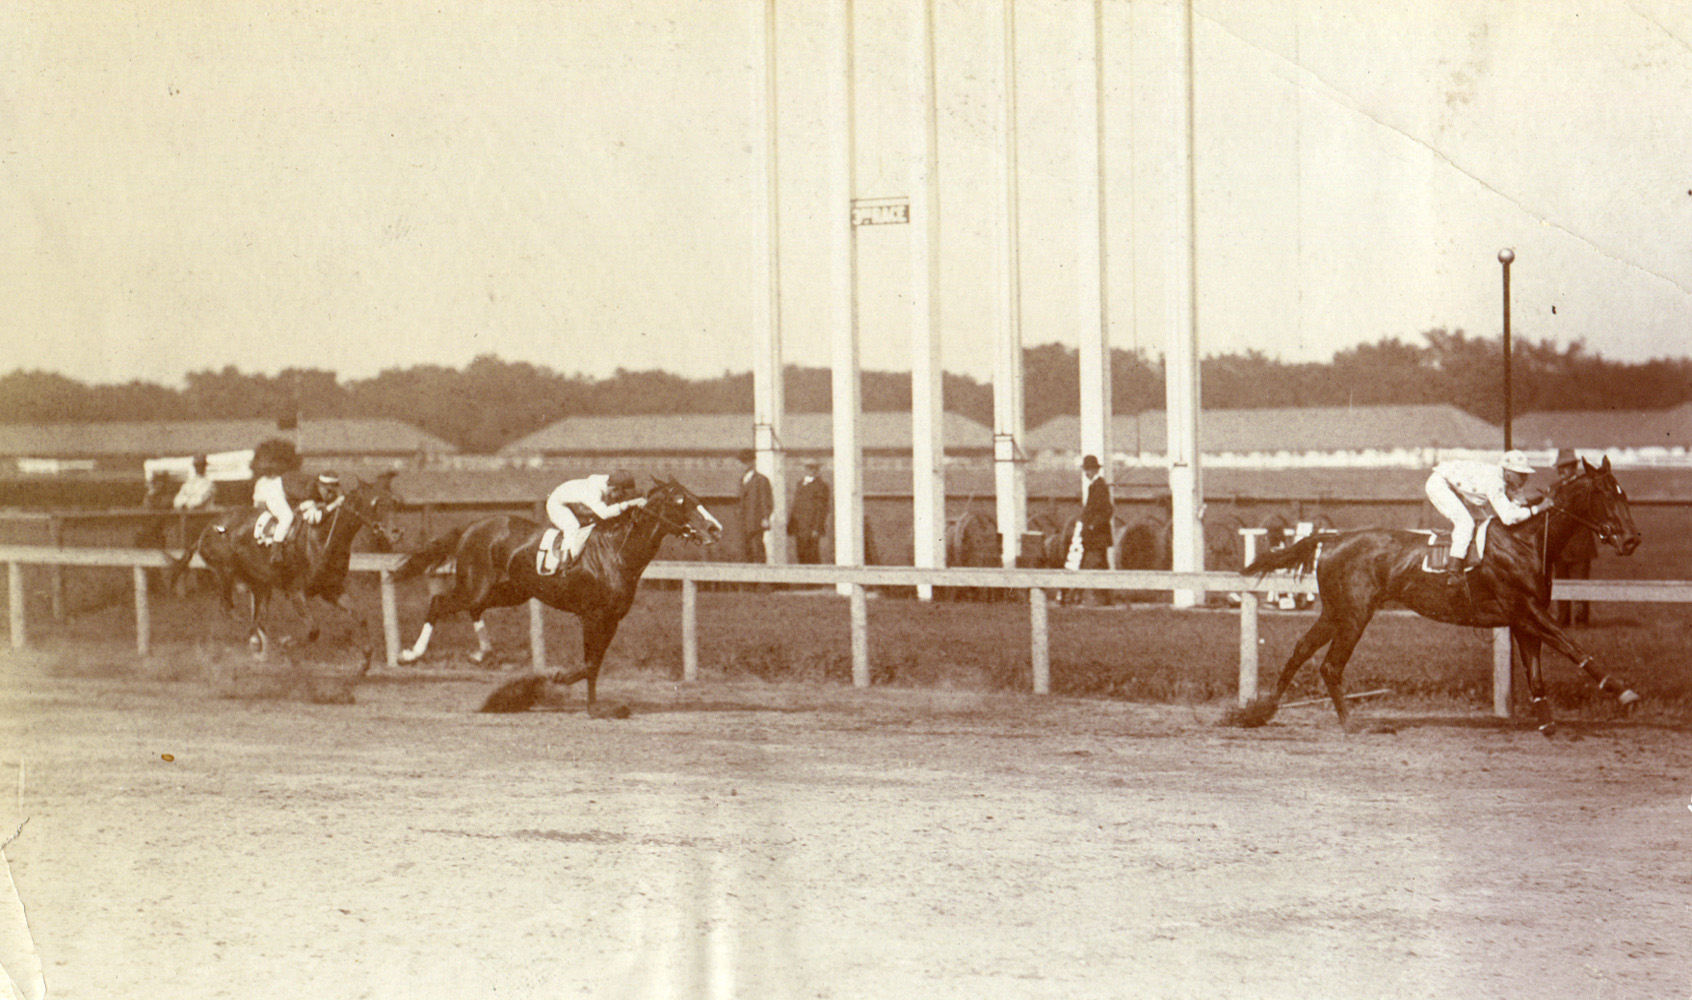 Maskette (Scoville up) winning the 1909 Gazelle at Gravesend (Museum Collection)